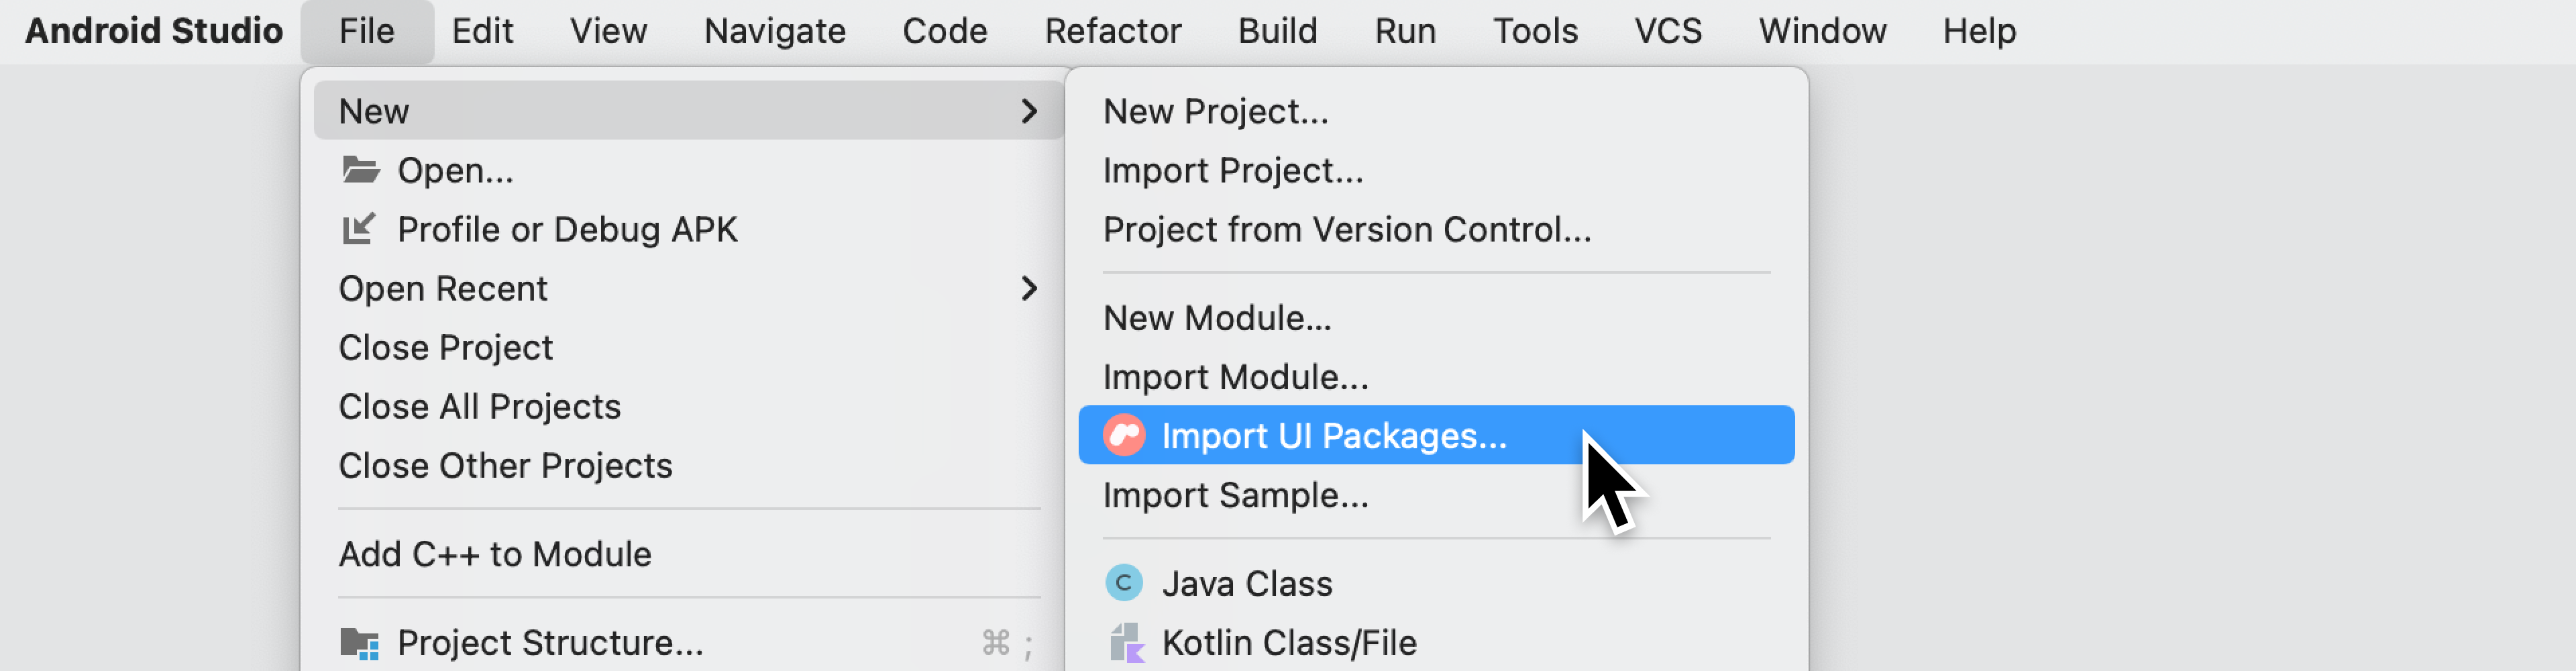 「File」選單下方的「Import UI Packages...」選項